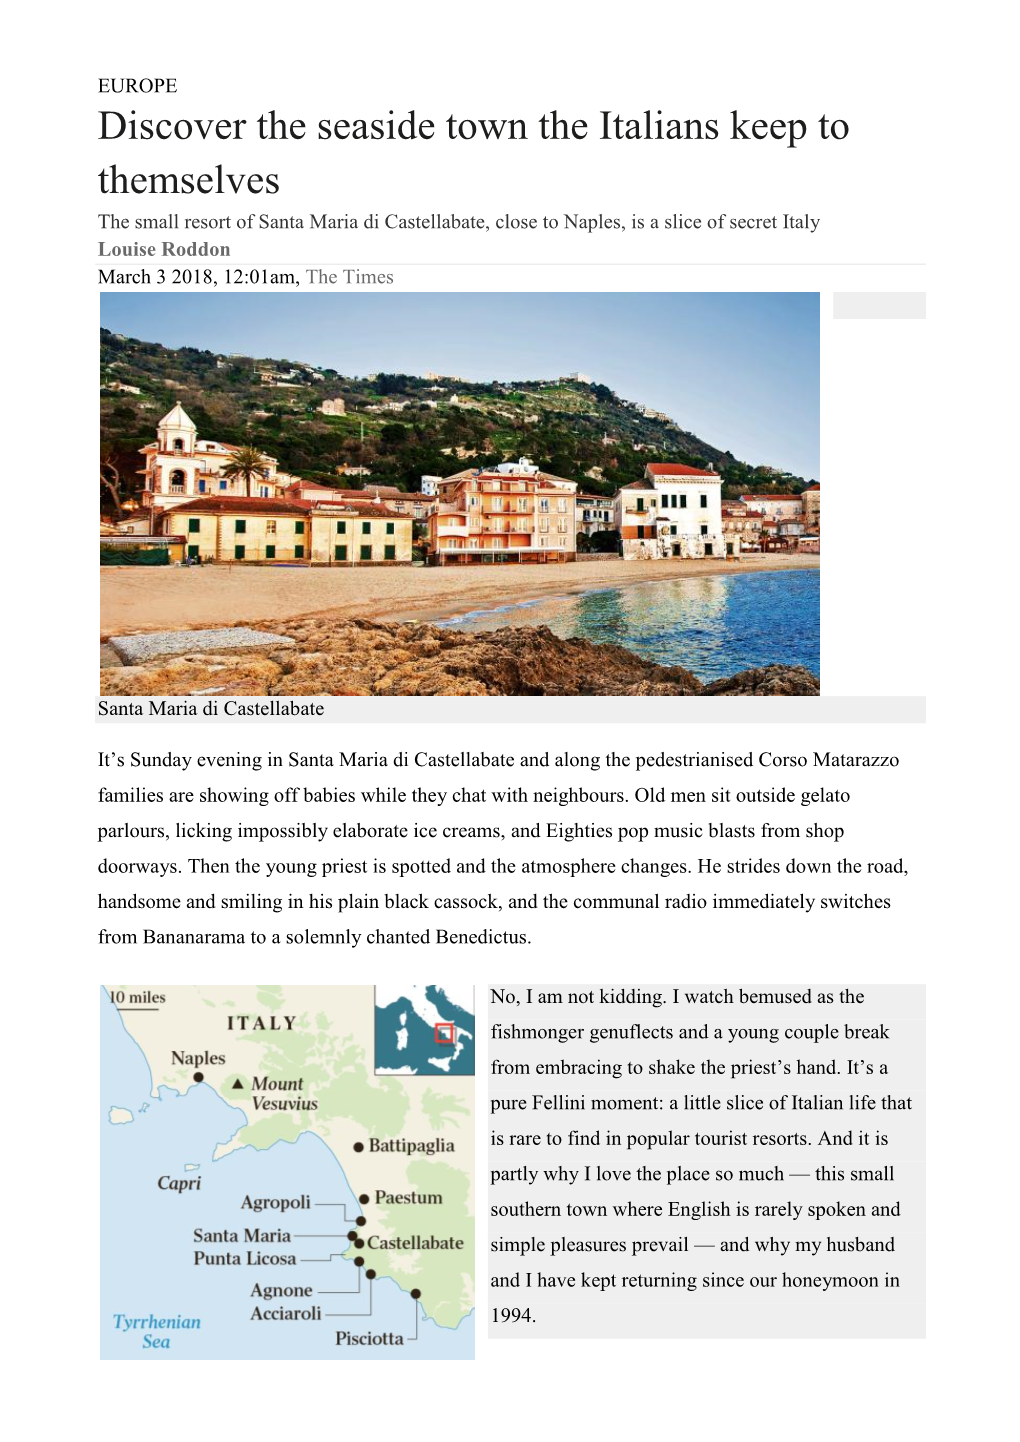 Discover the Seaside Town the Italians Keep to Themselves